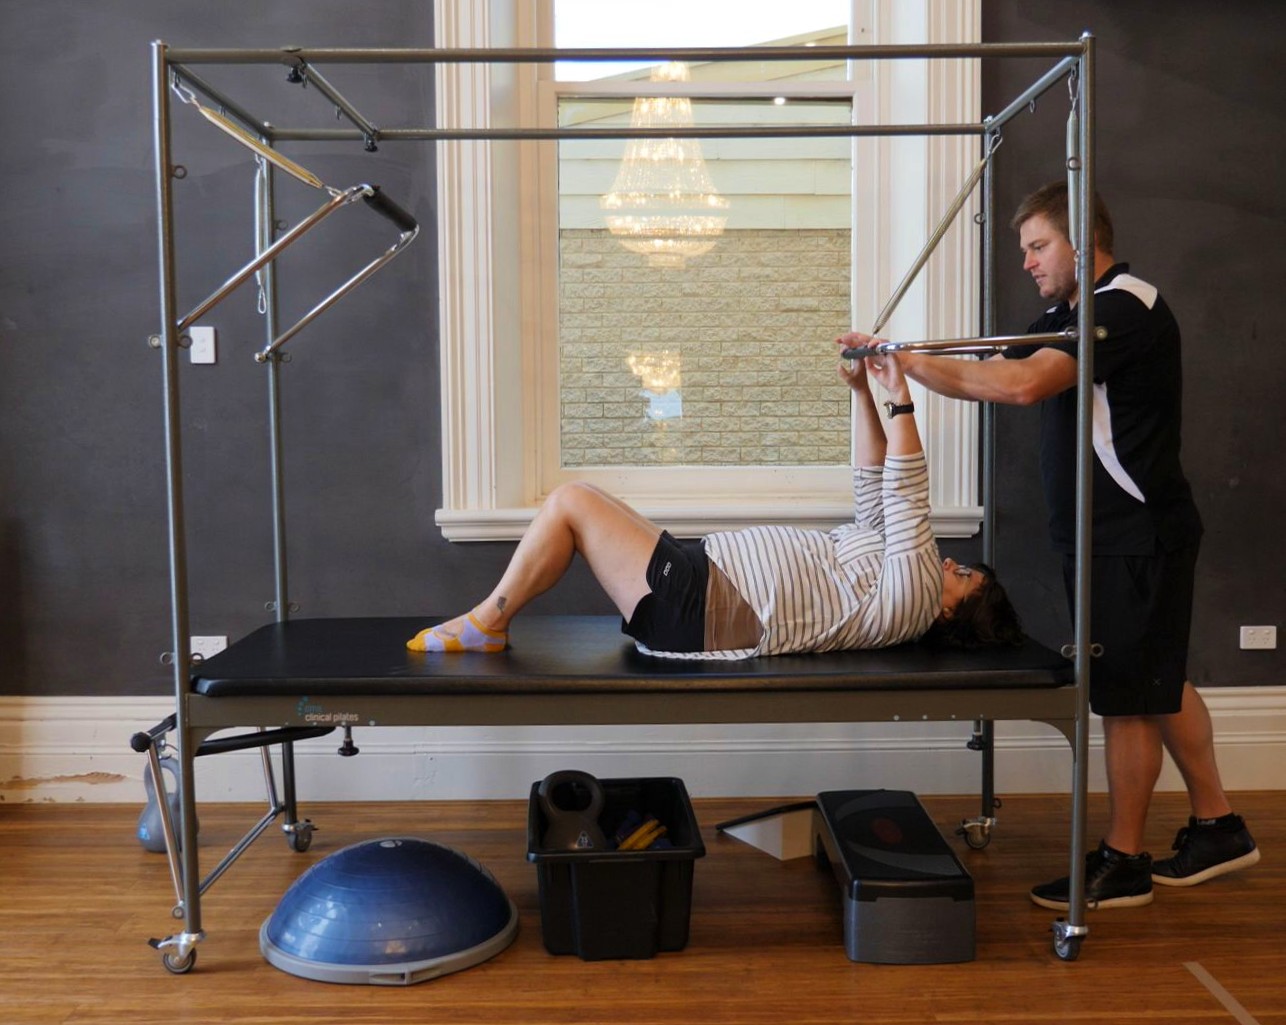 A woman in a black and white stripe top lays on a bed while stretching her arms with a pole with the help of a teacher.